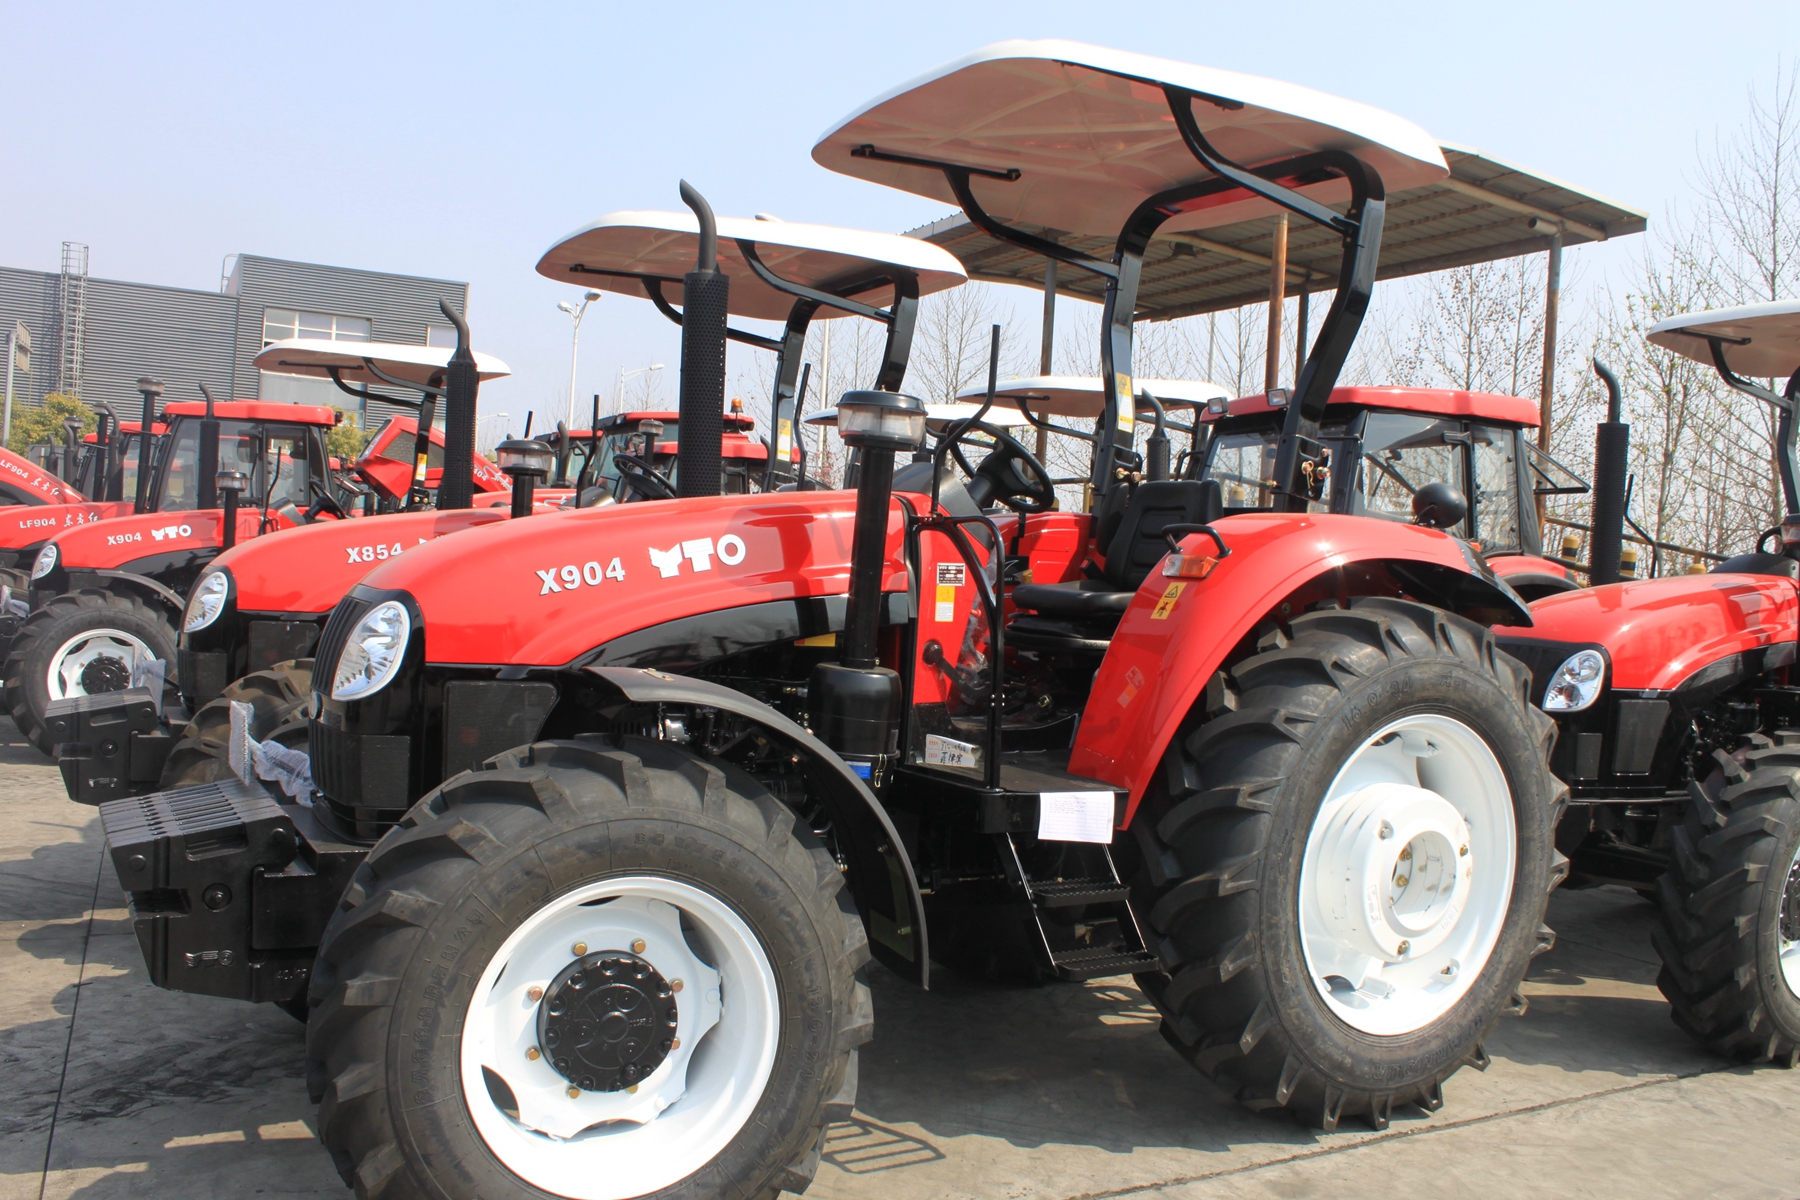 YTO Tractor X904 with Sun Roof Canopy